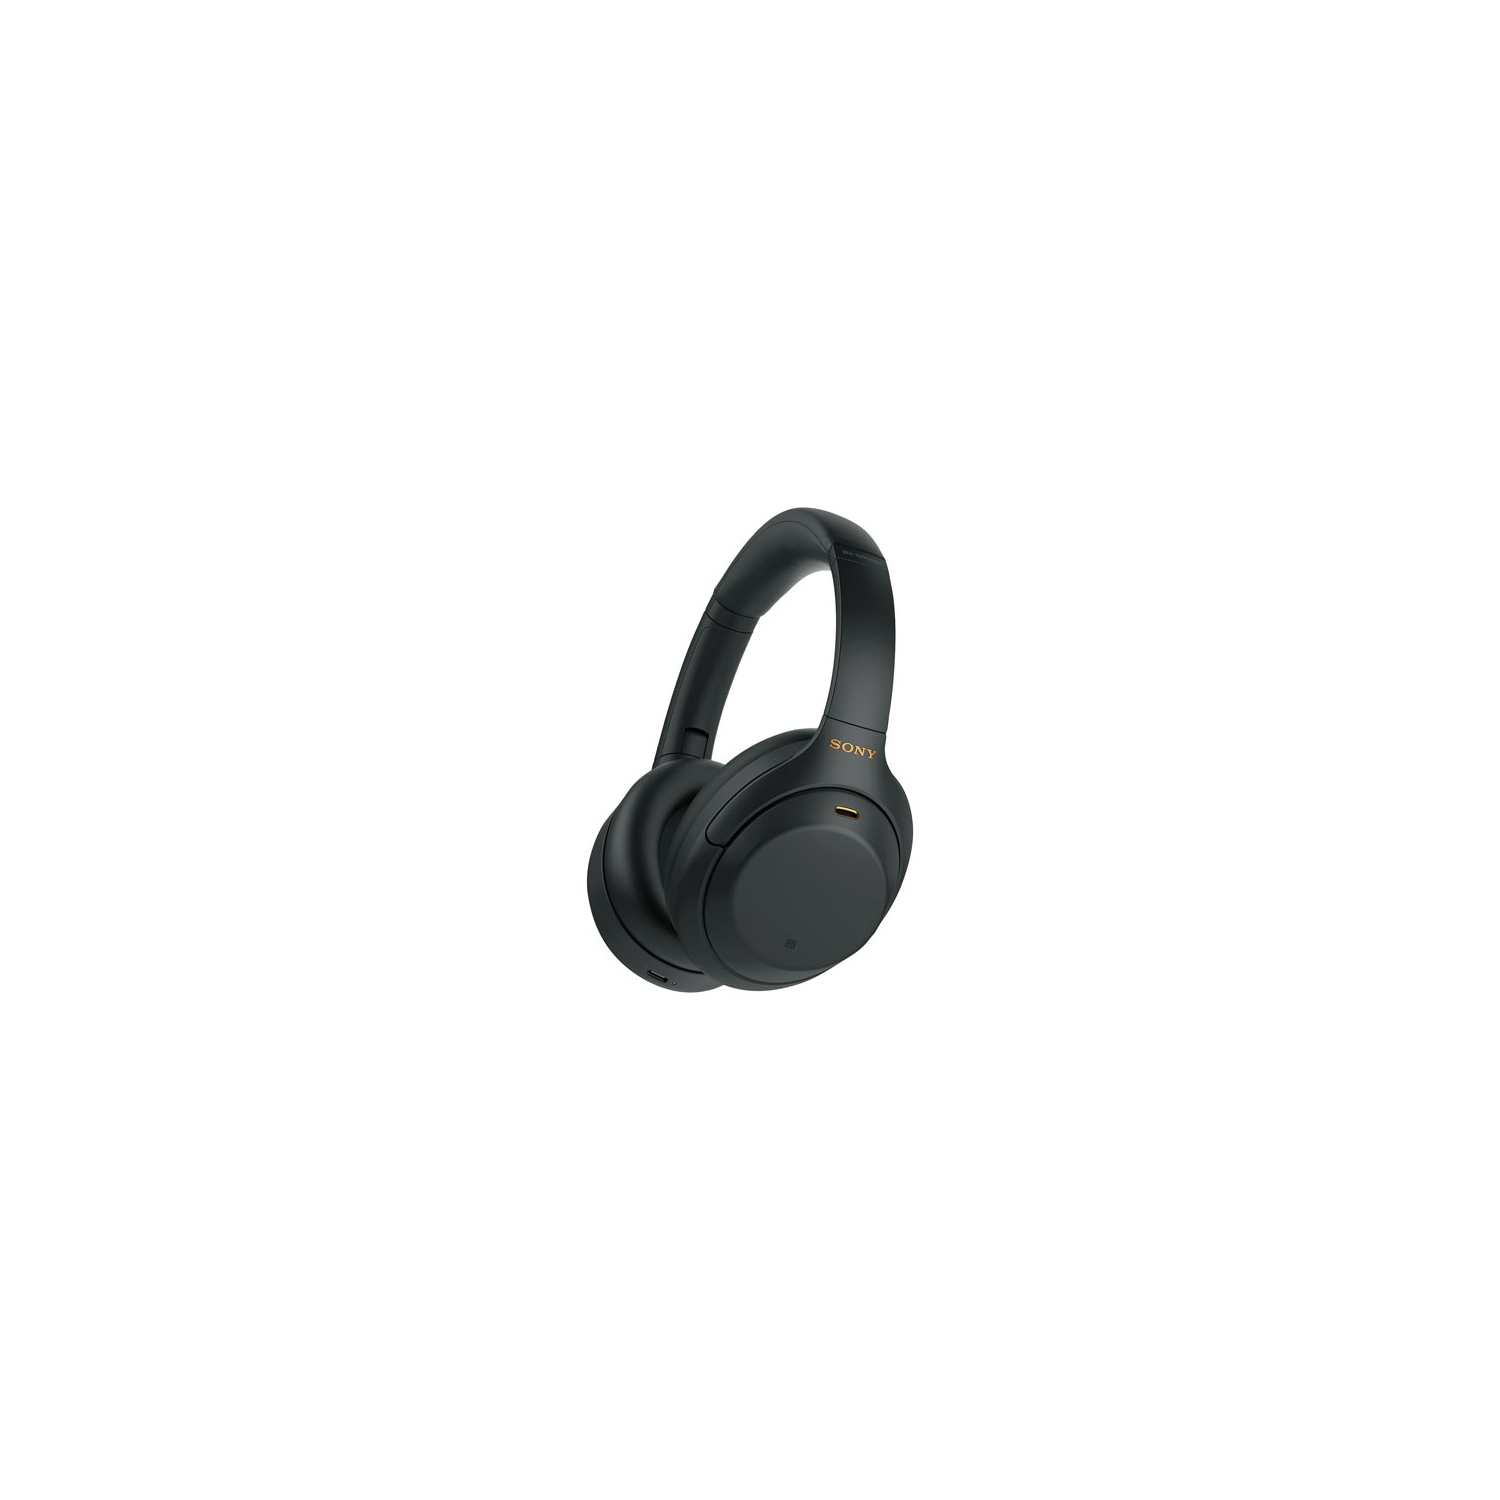 Refurbished (Good) - Sony WH-1000XM4 Over-Ear Noise Cancelling Bluetooth Headphones - Black